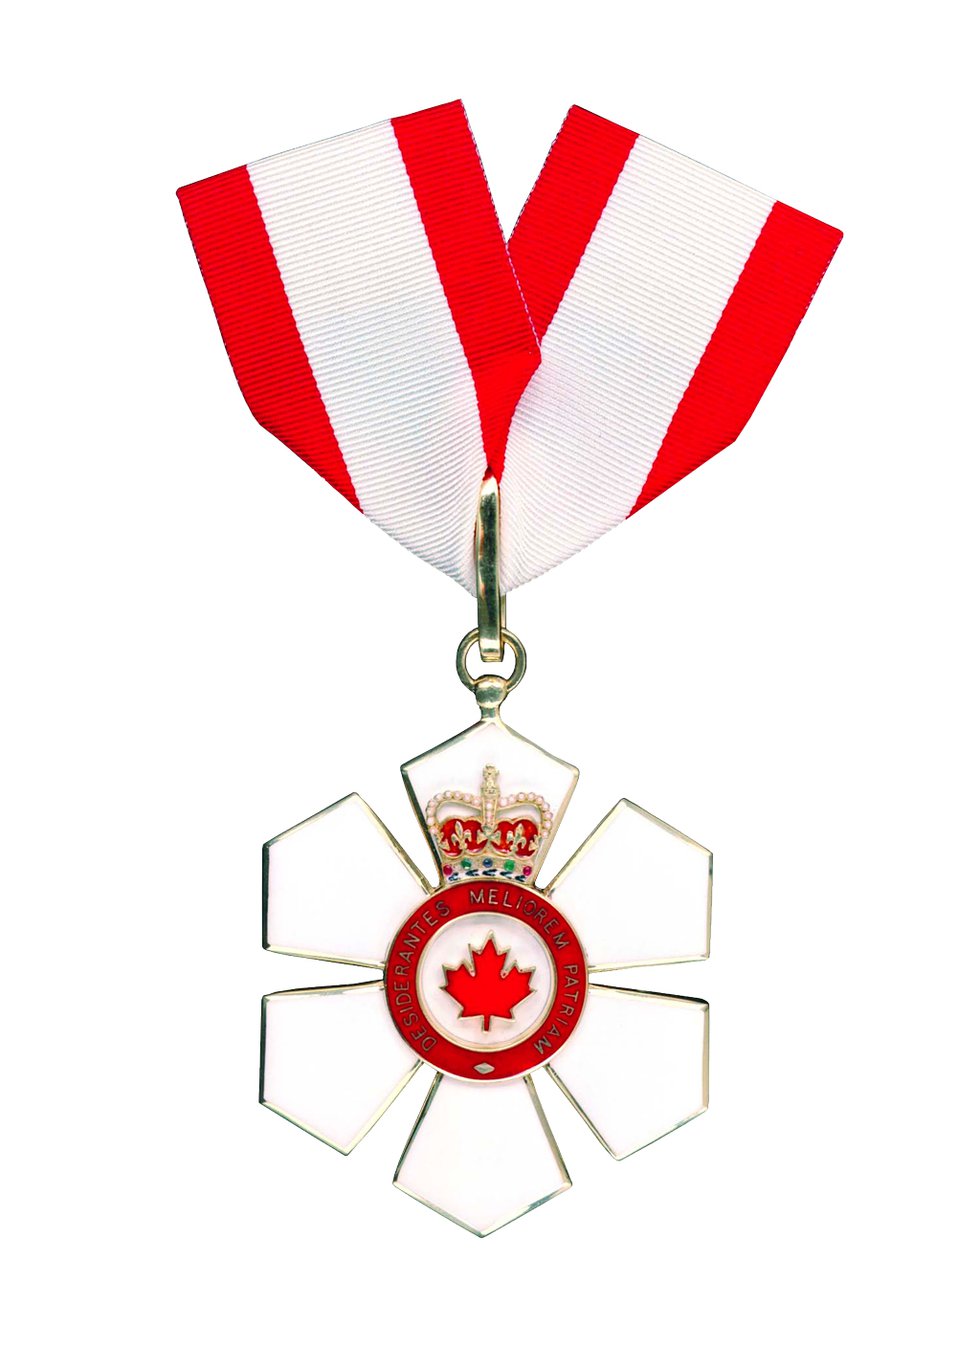 Governor General Announces 100 New Appointments To The Order Of Canada As Canada Turns 150